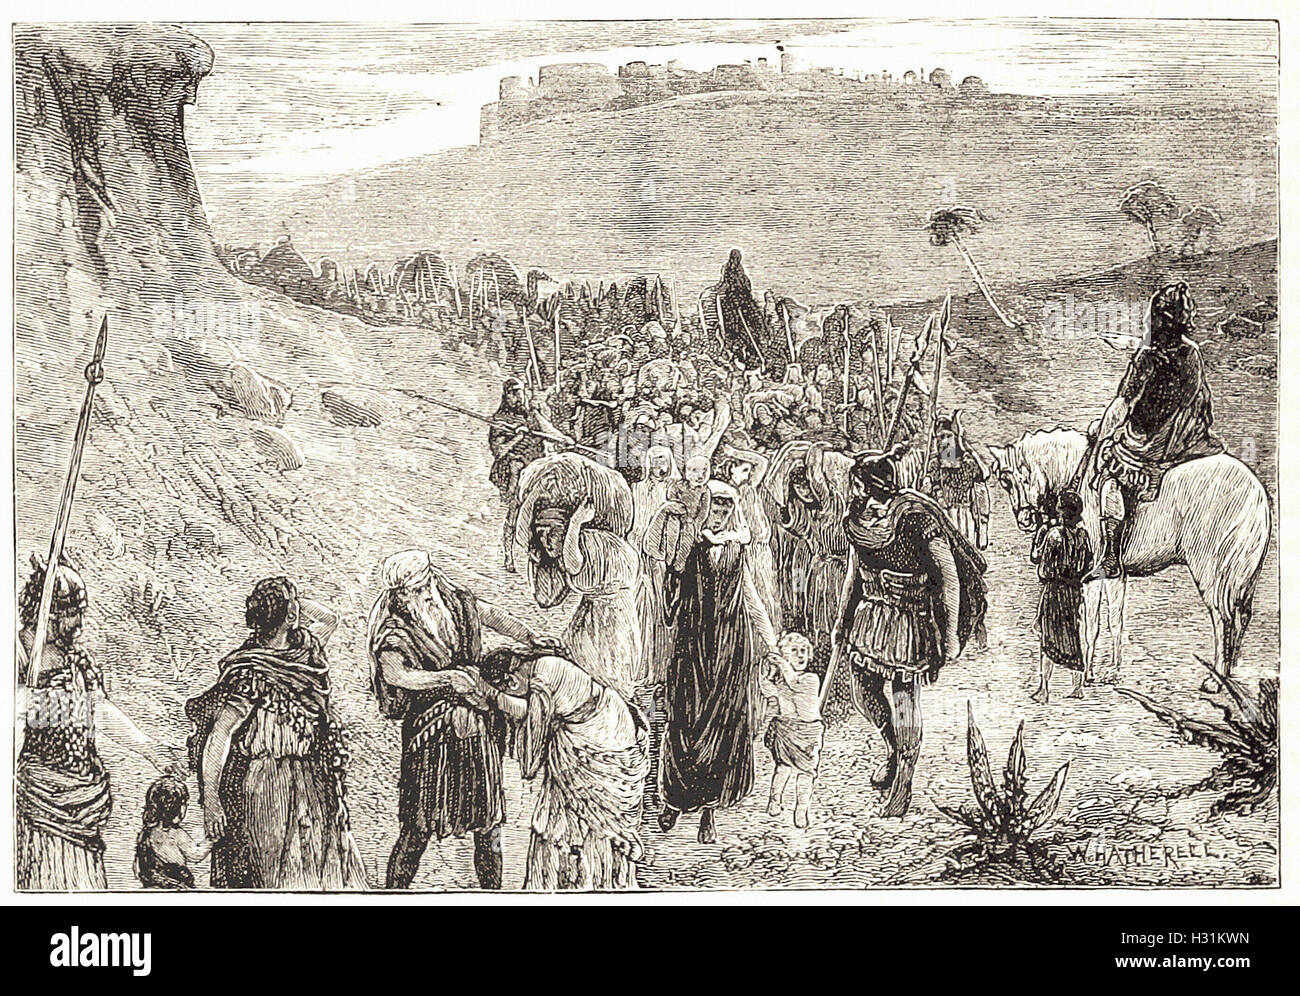 ISRAELITES GOING INTO CAPTIVITY - from 'Cassell's Illustrated Universal History' - 1882 Stock Photo